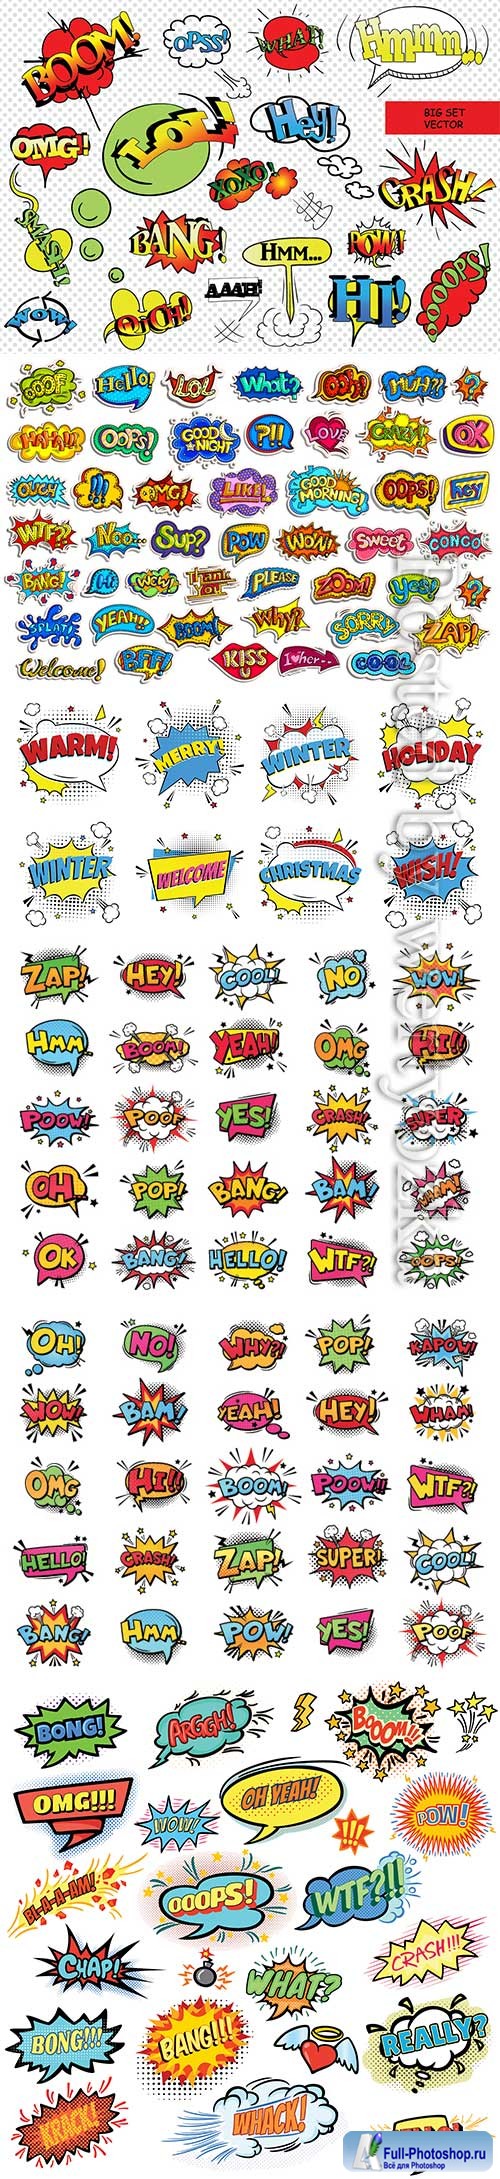 Sticker collection for comic style chat bubble for different word